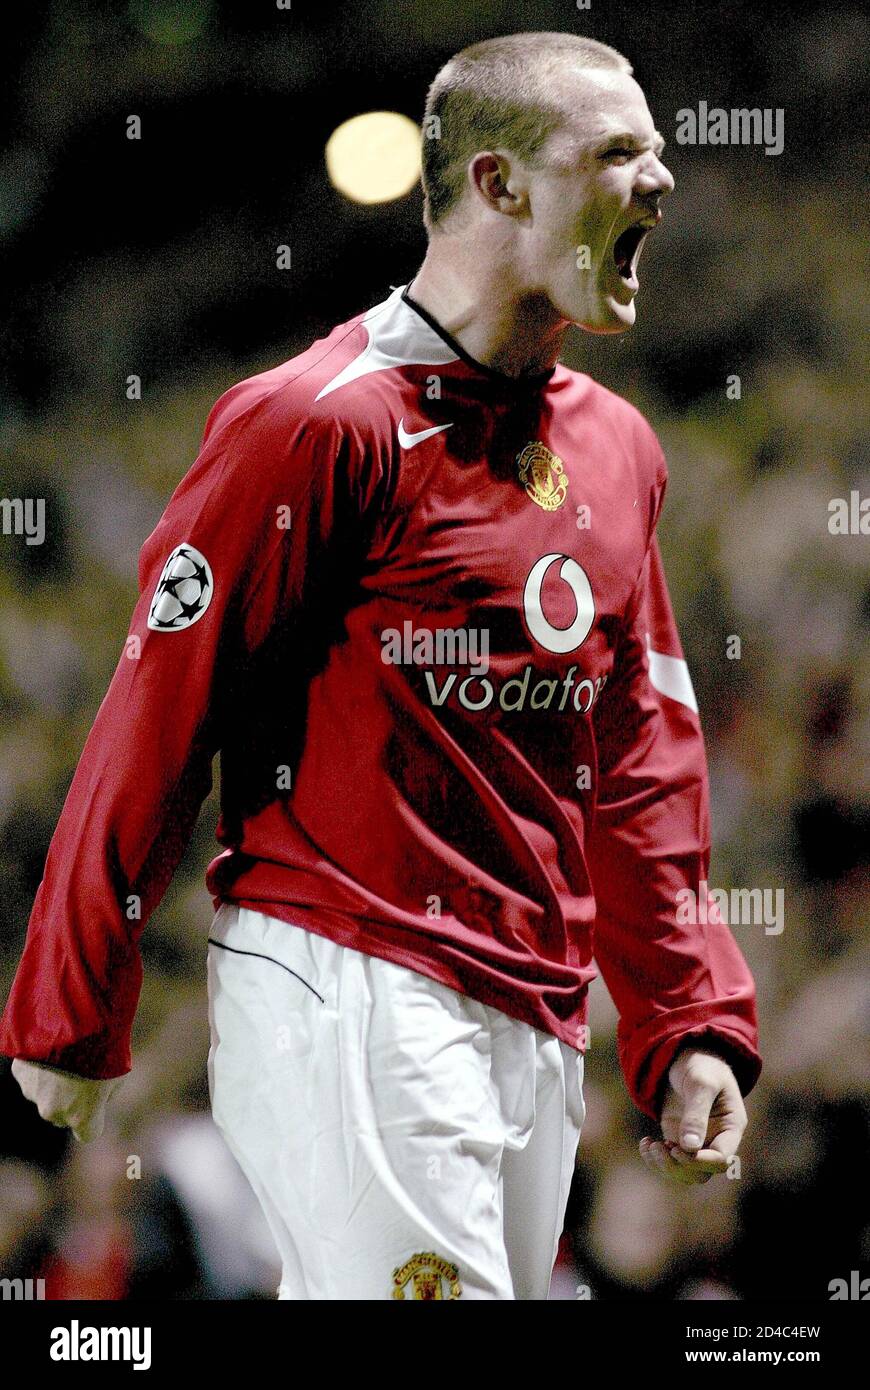 Manchester United's Rooney celebrates scoring a hat-trick against  Fenerbahce in their Champions League match at Old Trafford. Manchester  United's Wayne Rooney celebrates scoring a hat-trick on his team debut  against Fenerbahce in